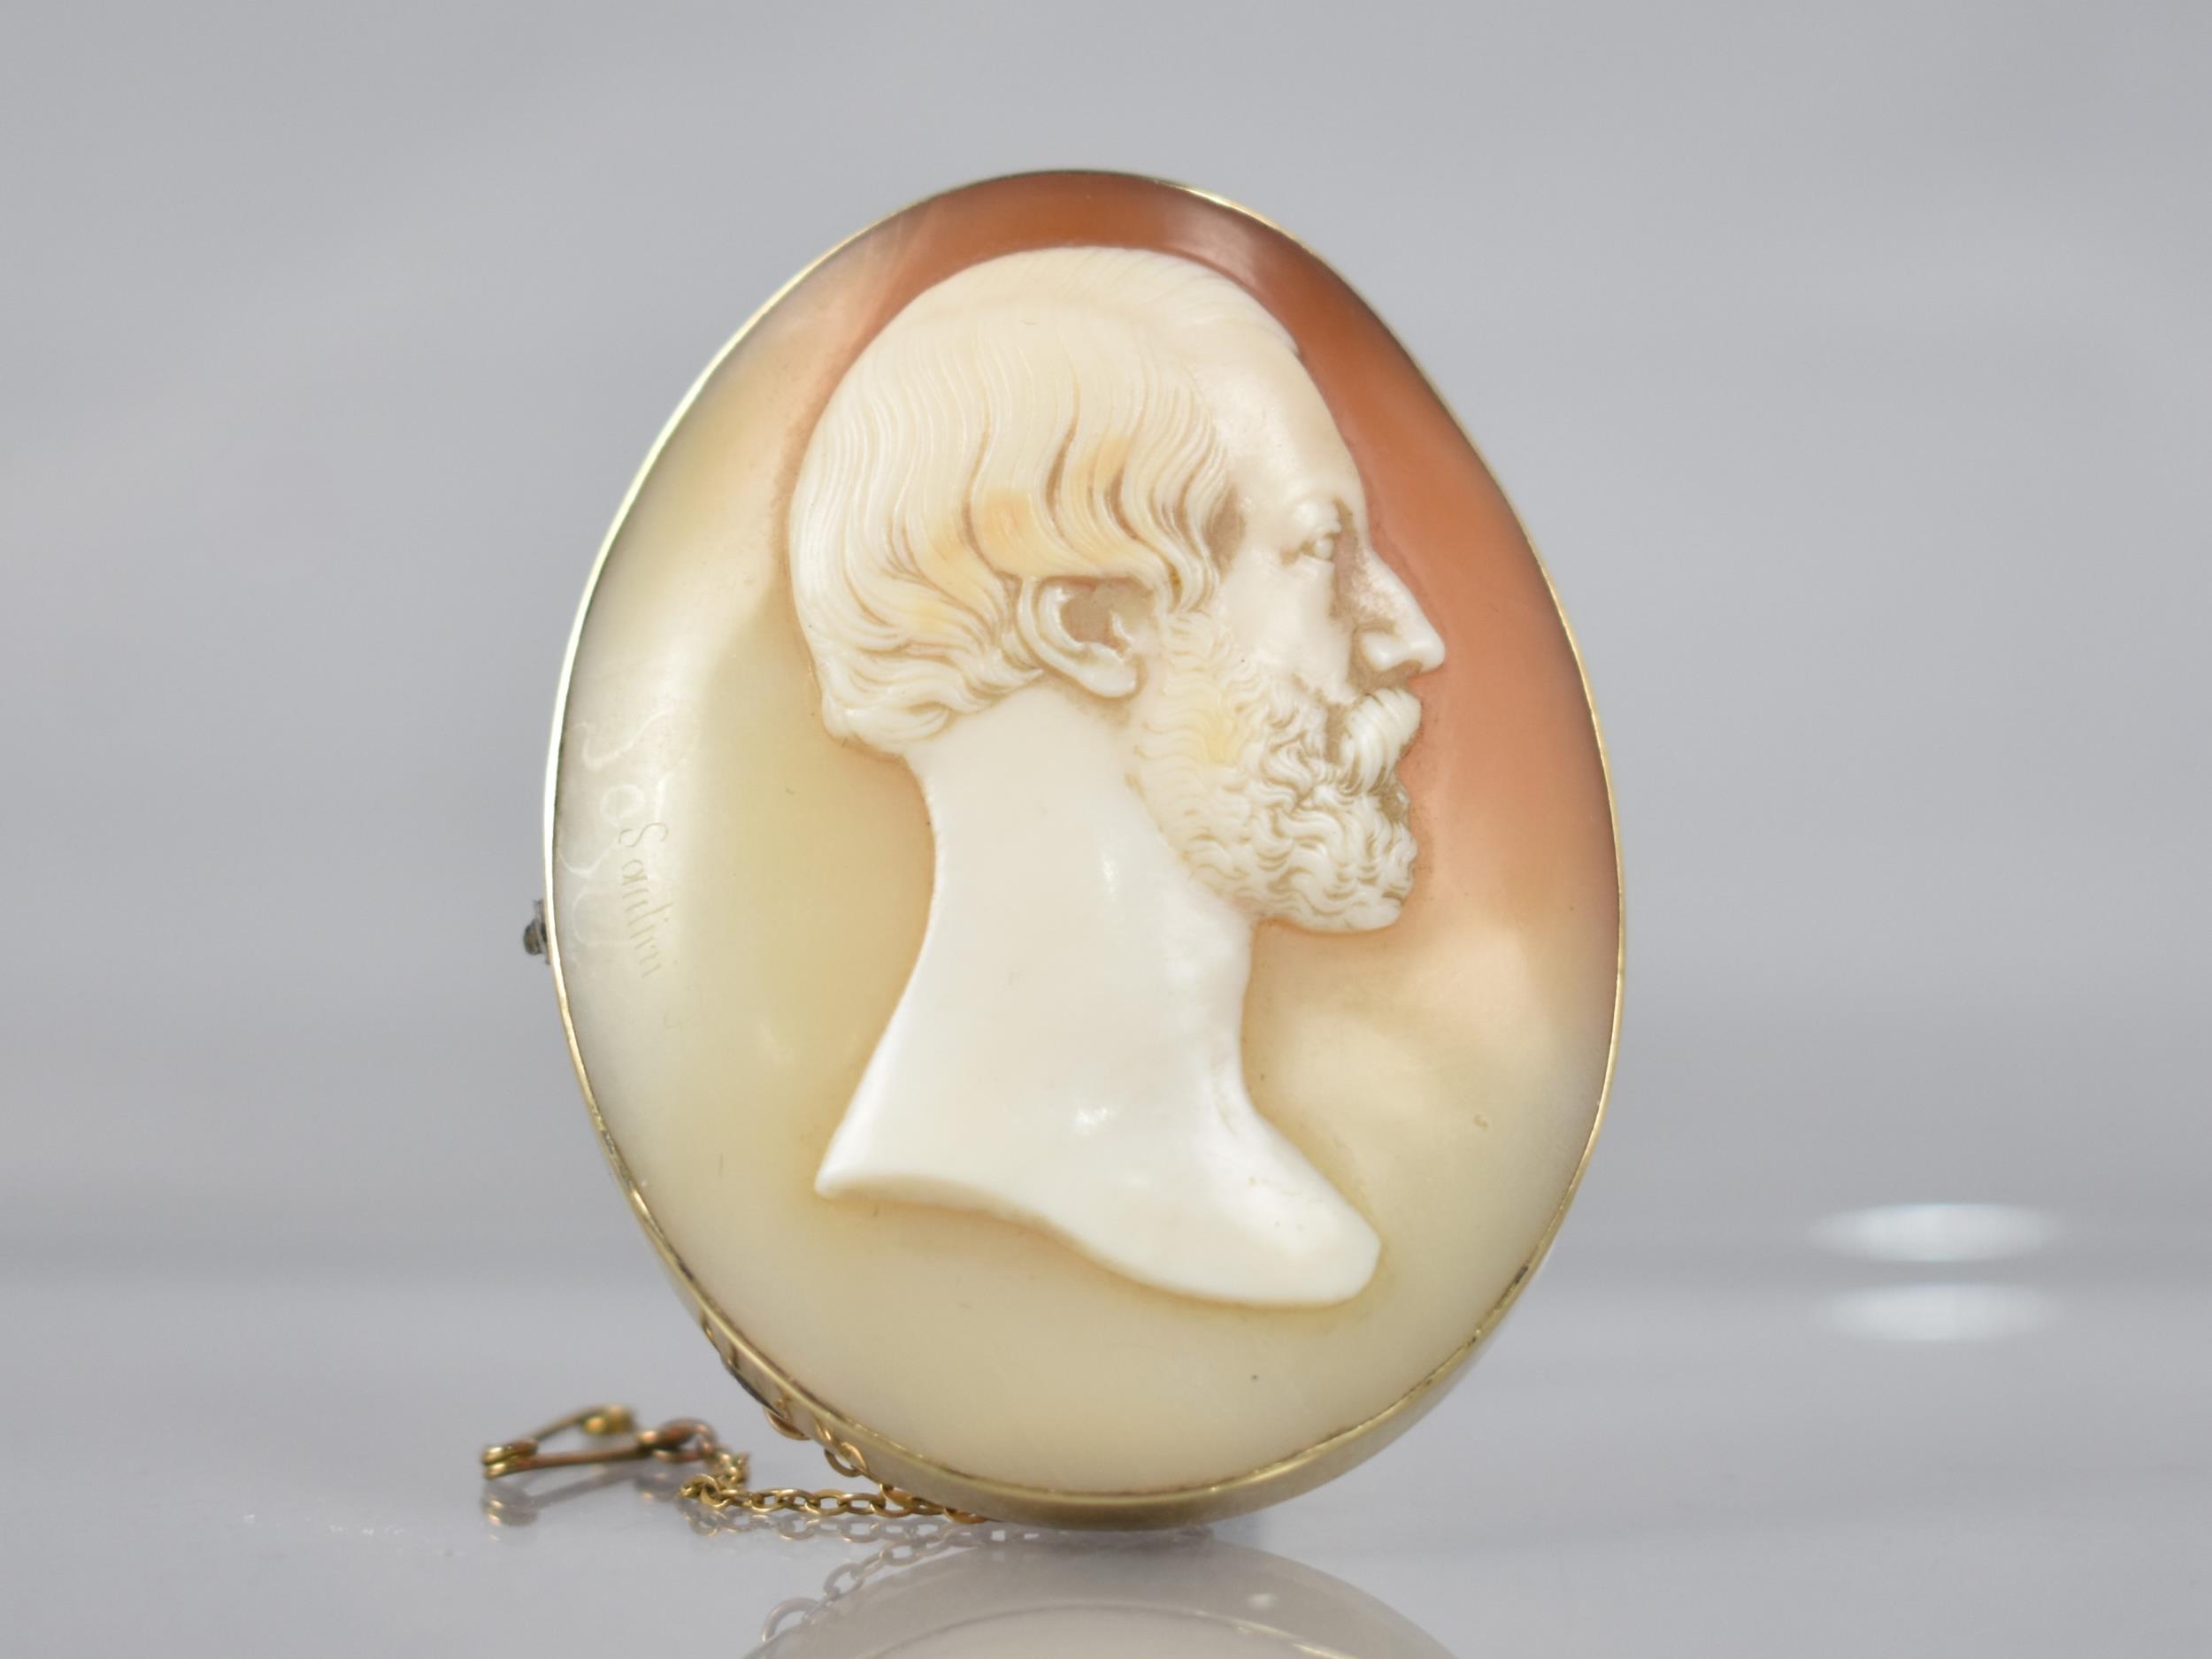 Saulini Workshop: An Early/Mid 19th Century Well Carved Italian Grand Tour Shell Cameo Depicting - Image 2 of 7